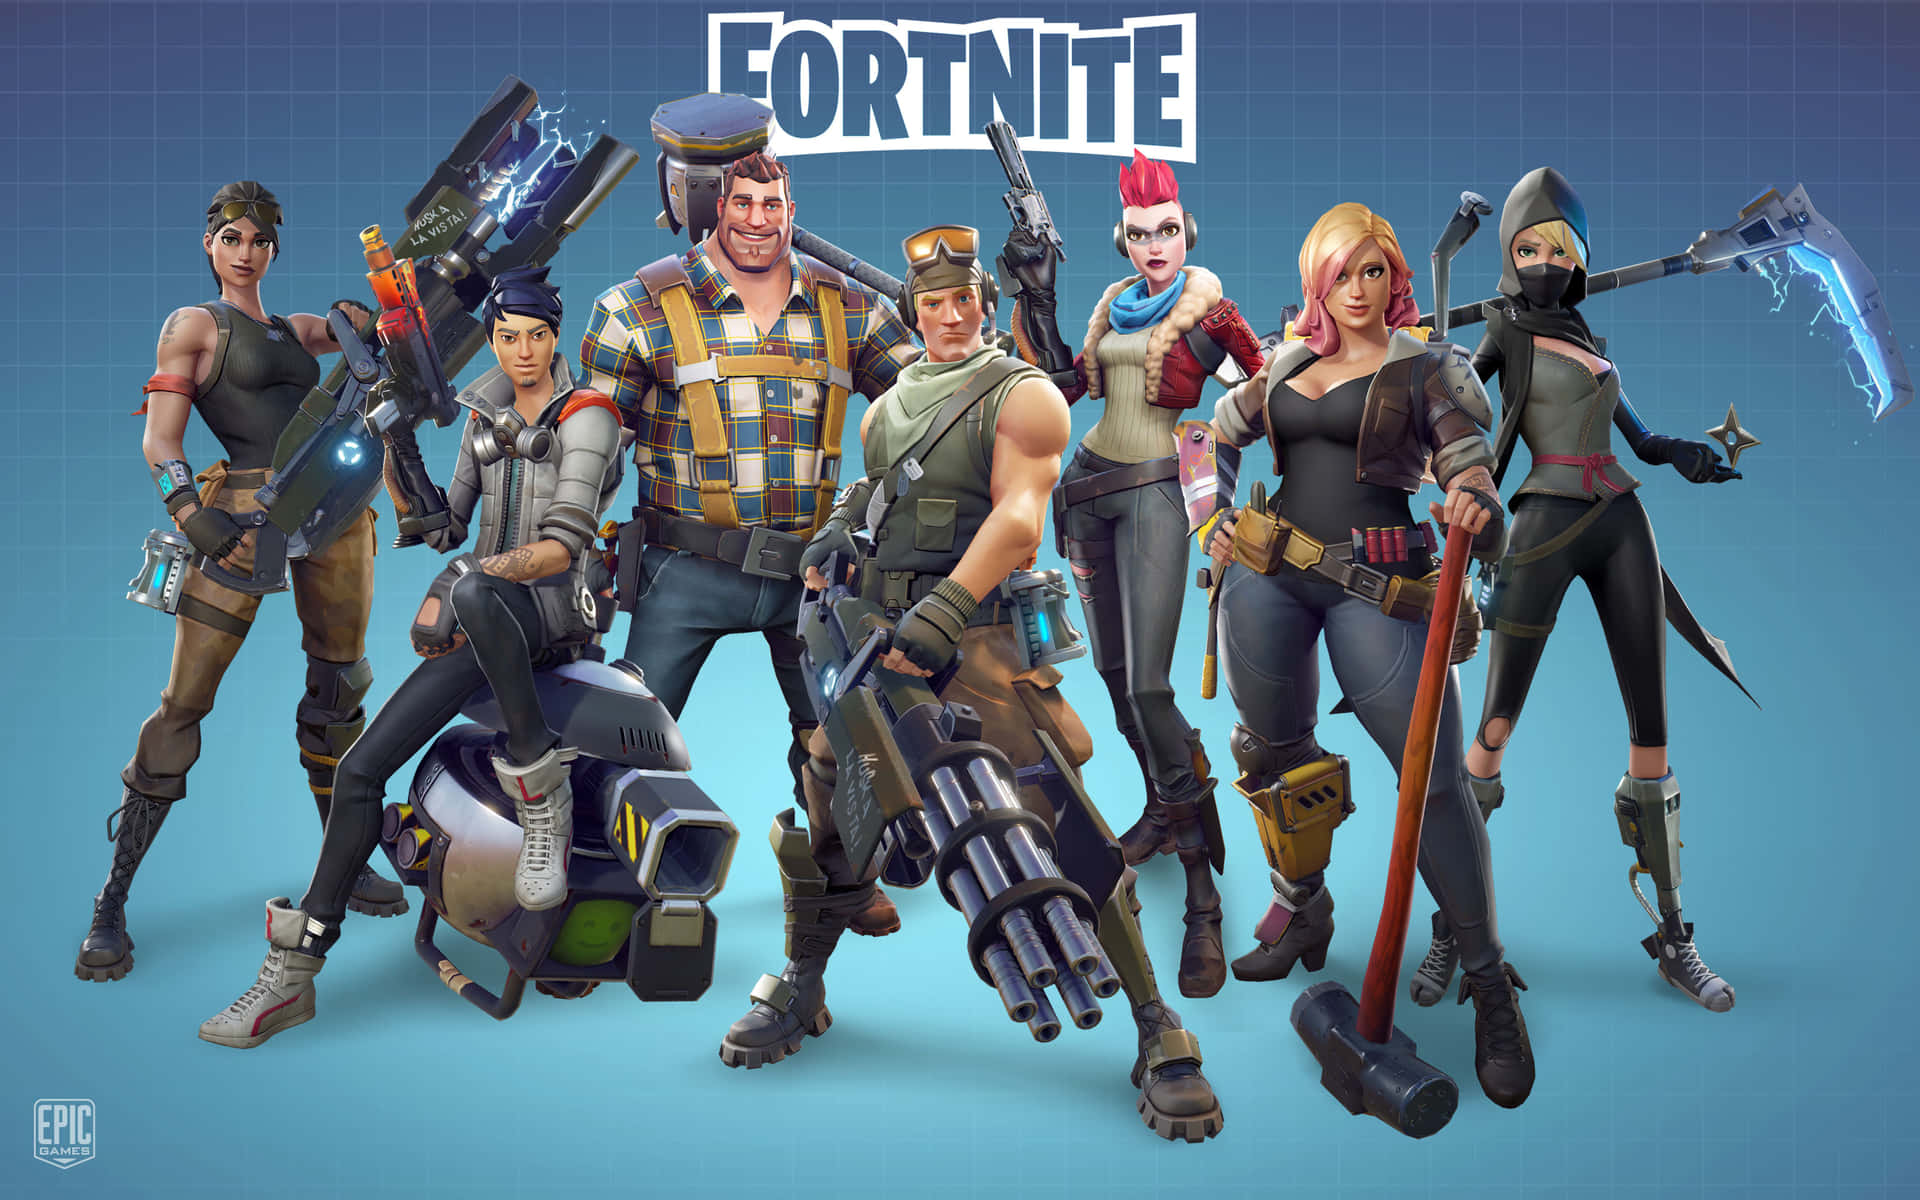 Fortnite - A Group Of People With Guns